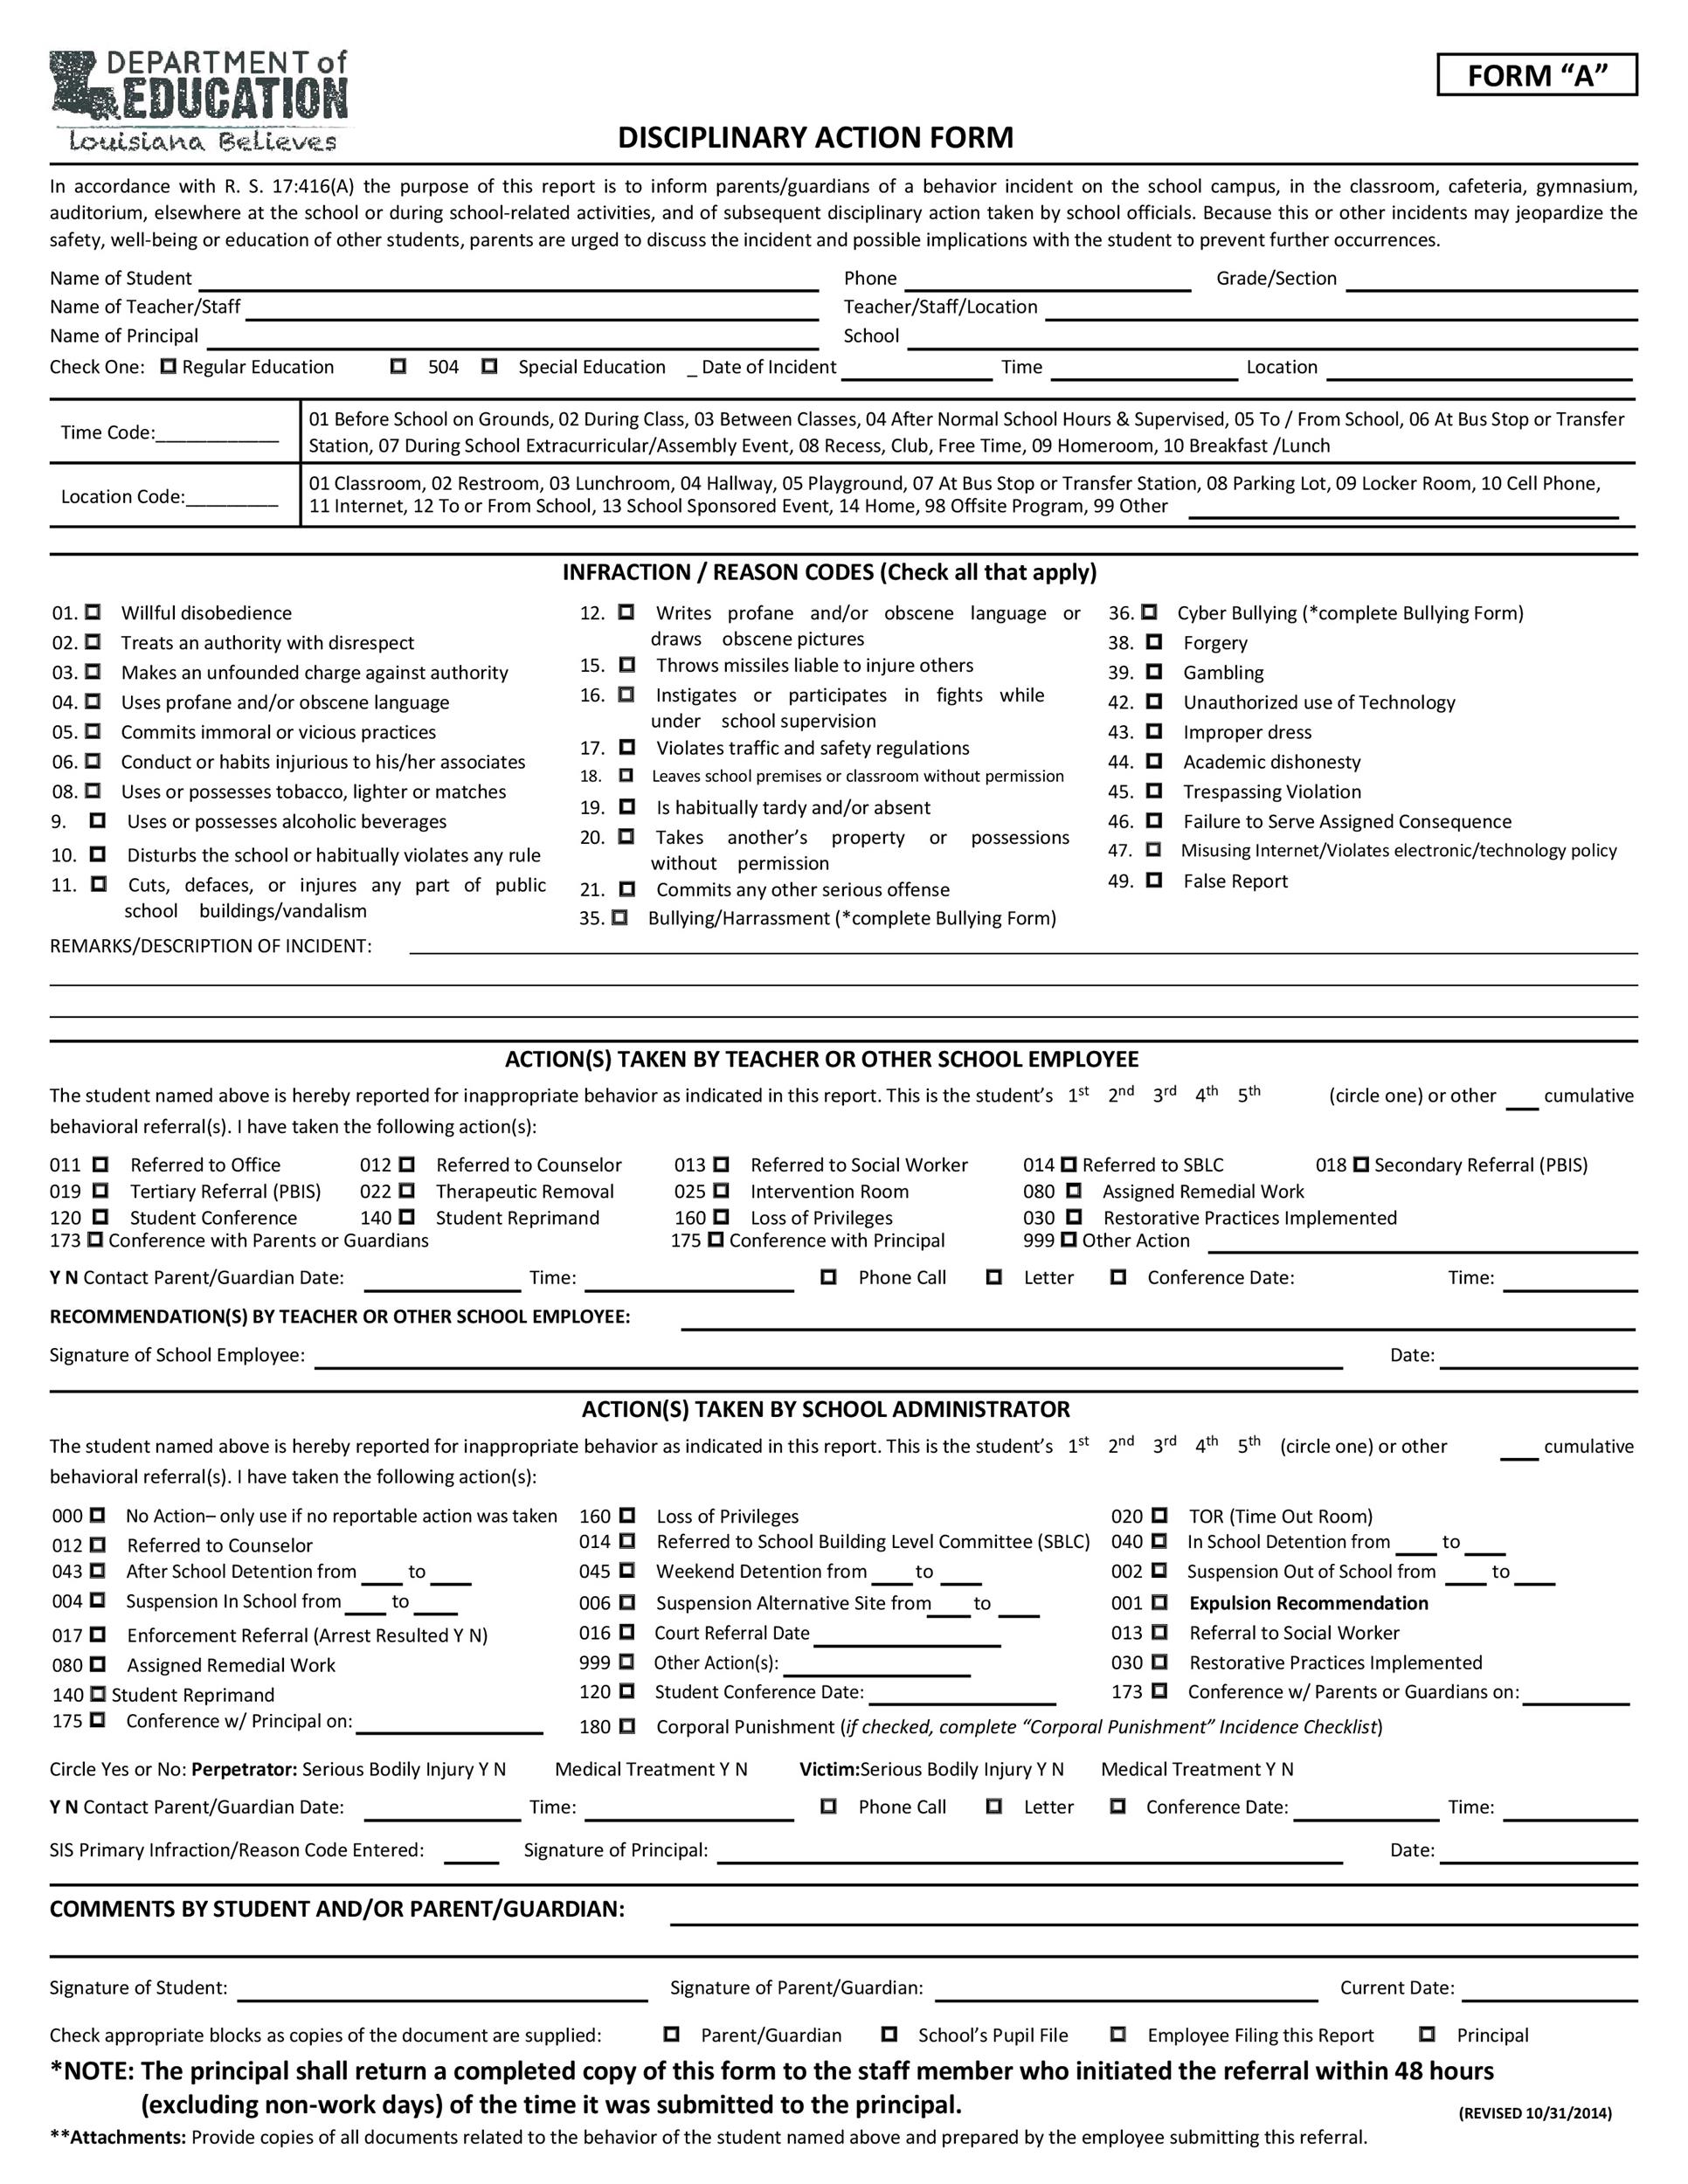 Free Disciplinary Action Form 39